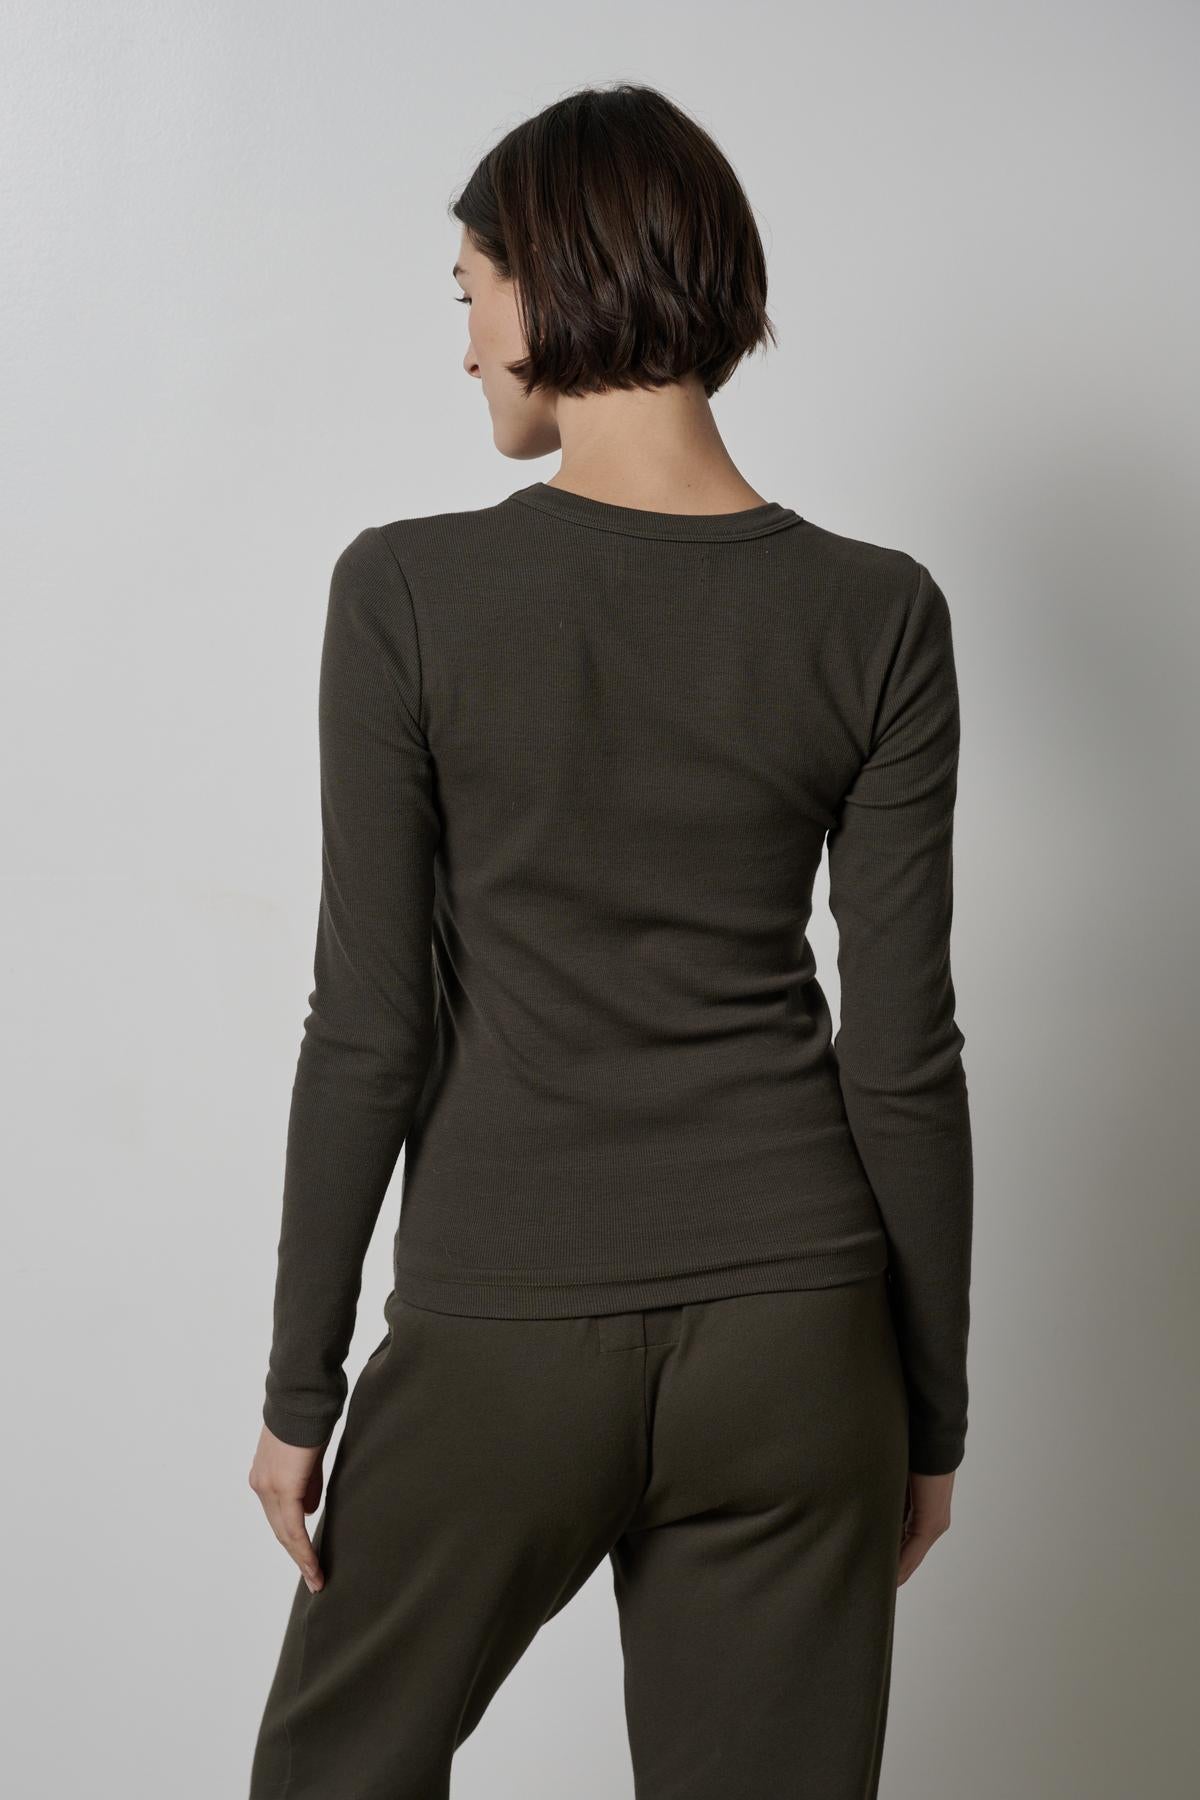   The back view of a woman wearing an Olive Camino Tee by Velvet by Jenny Graham. 